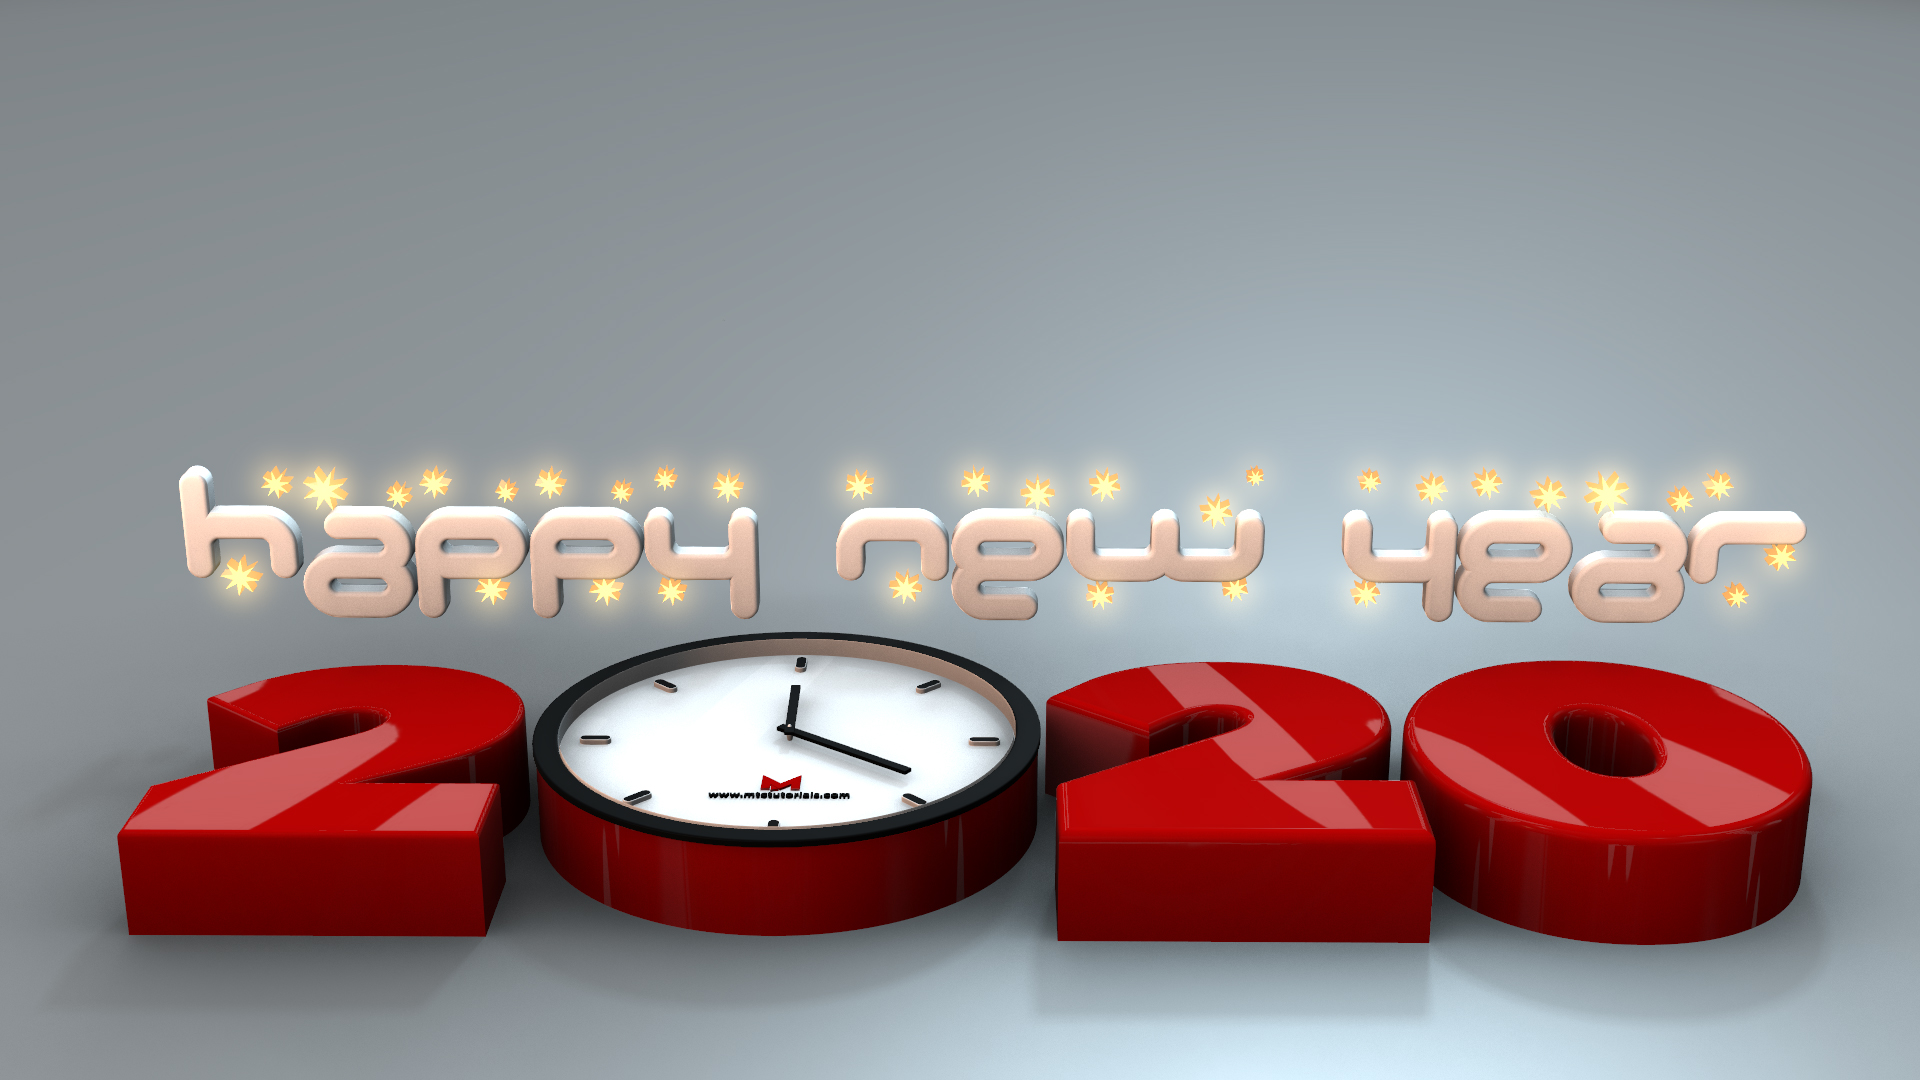 Happy new year 2020 Wallpapers and backgrounds High Quality Free Download